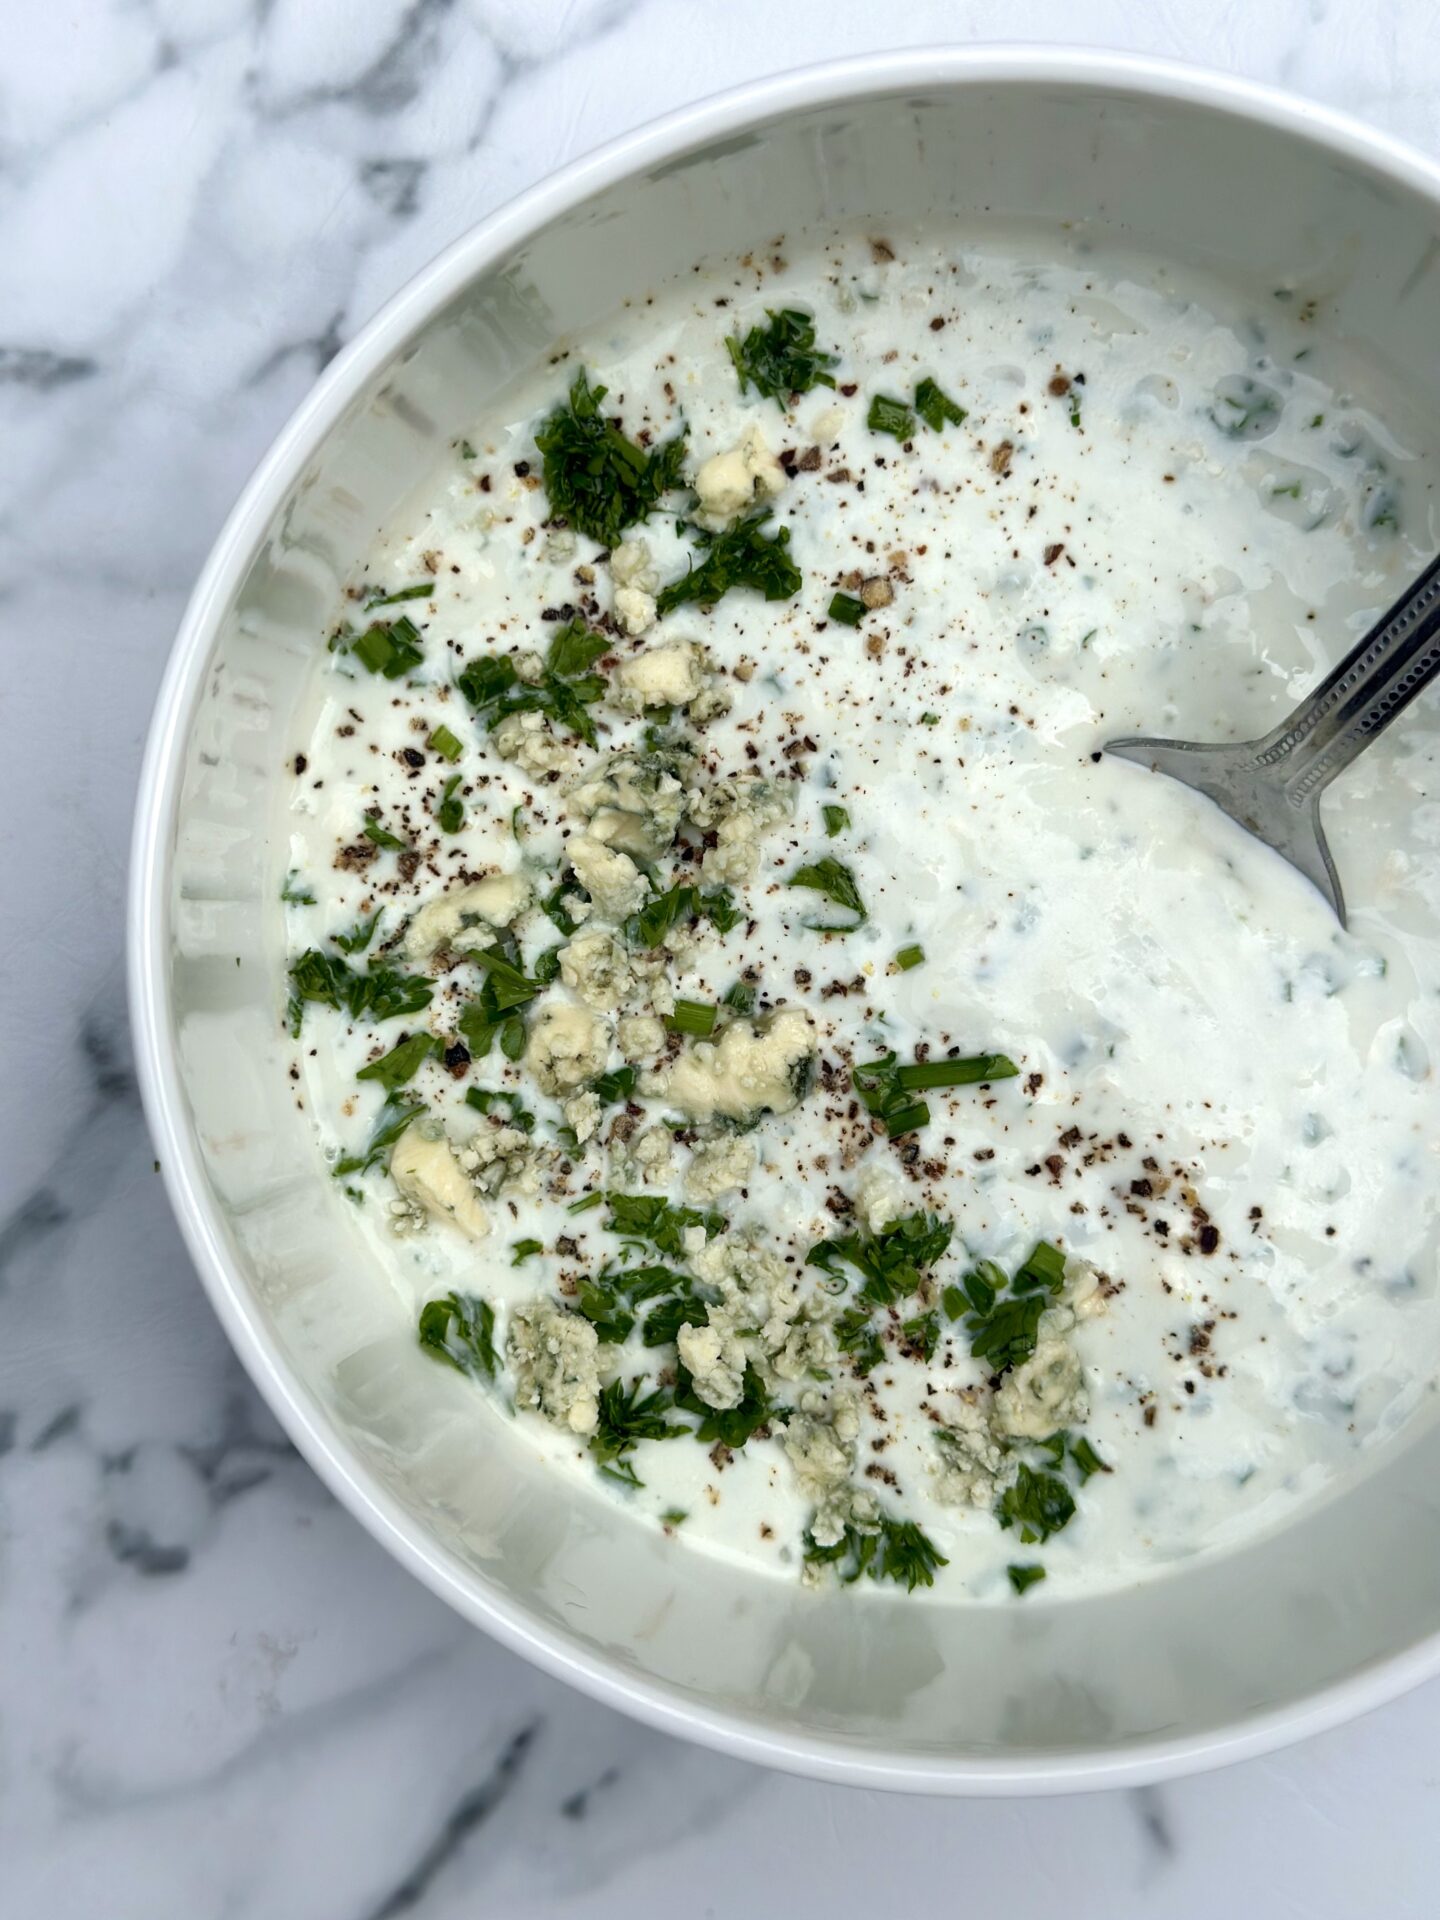 Bowl of homemade blue cheese dressing seen from above garnished with crumbled blue cheese and fresh herbs, sitting on a white marble table